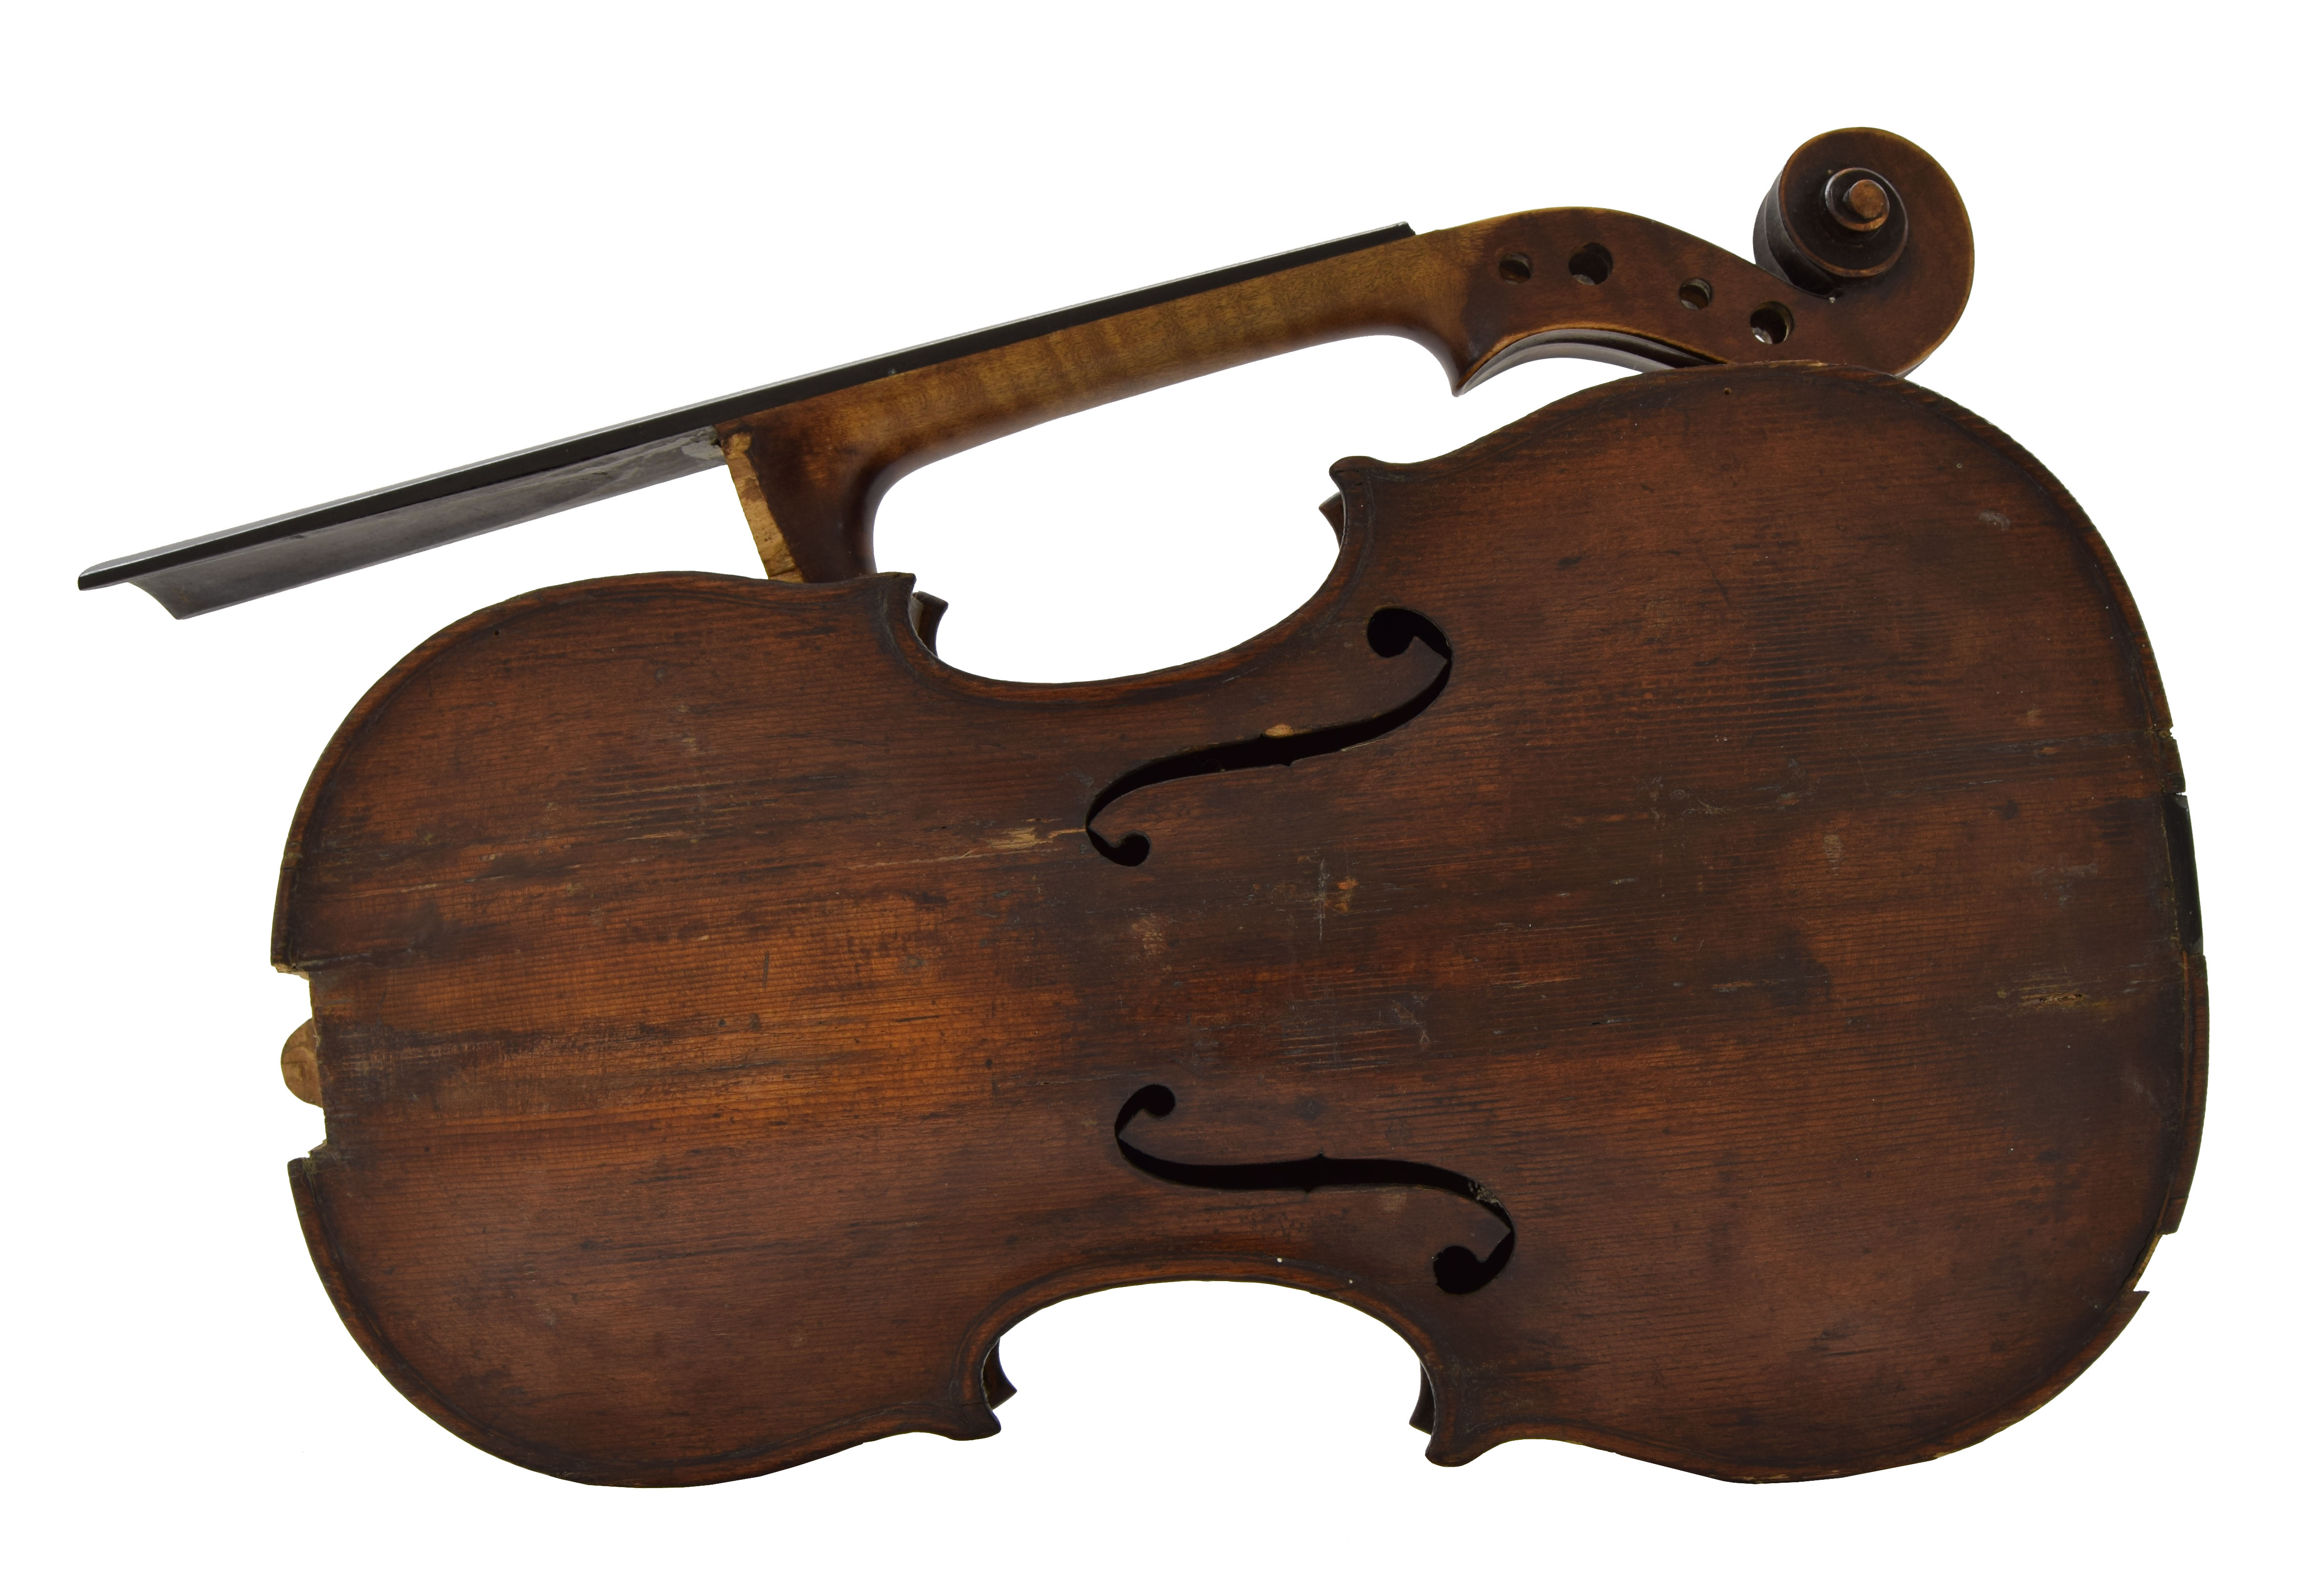 French violin by and branded Chappuy á Paris below the button, with associated neck and scroll, 14